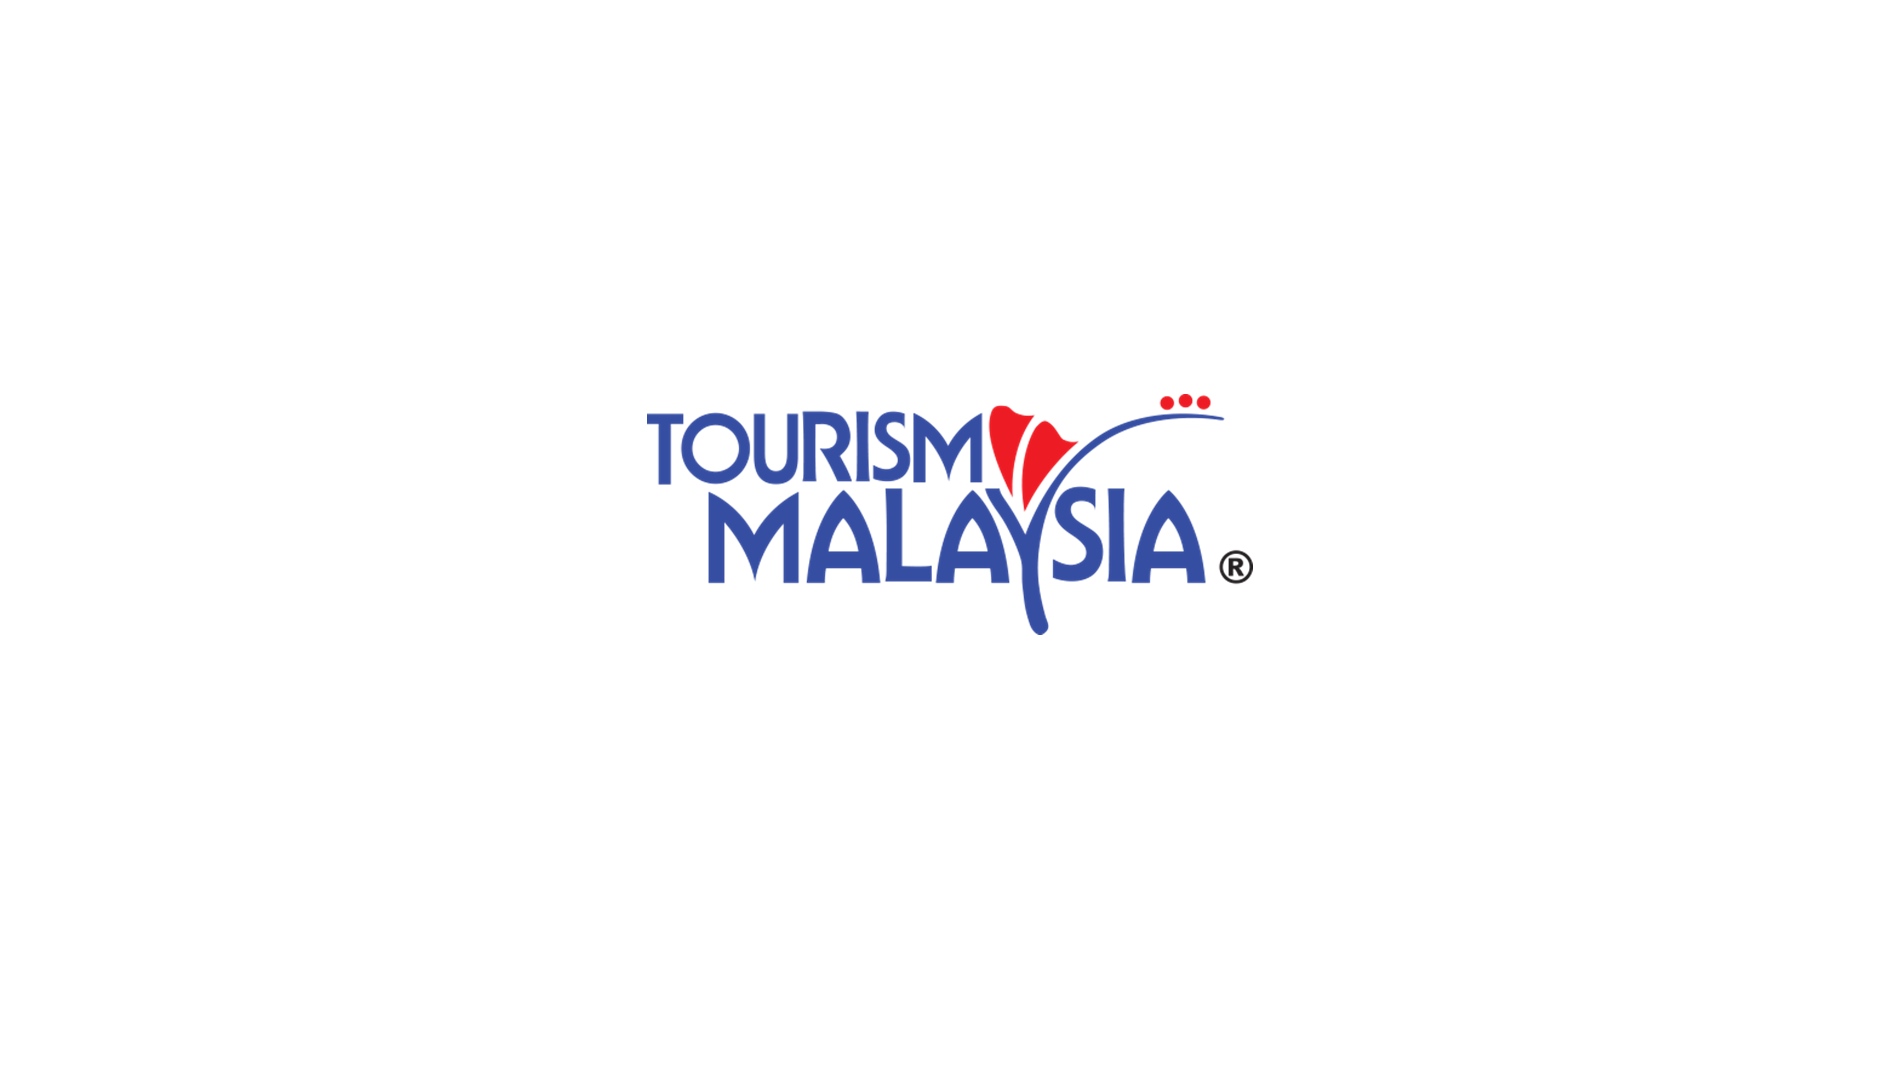 Ministry Of Tourism Arts And Culture Organises Visit Malaysia 2020 Campaign Logo Competition Gaya Travel Magazine